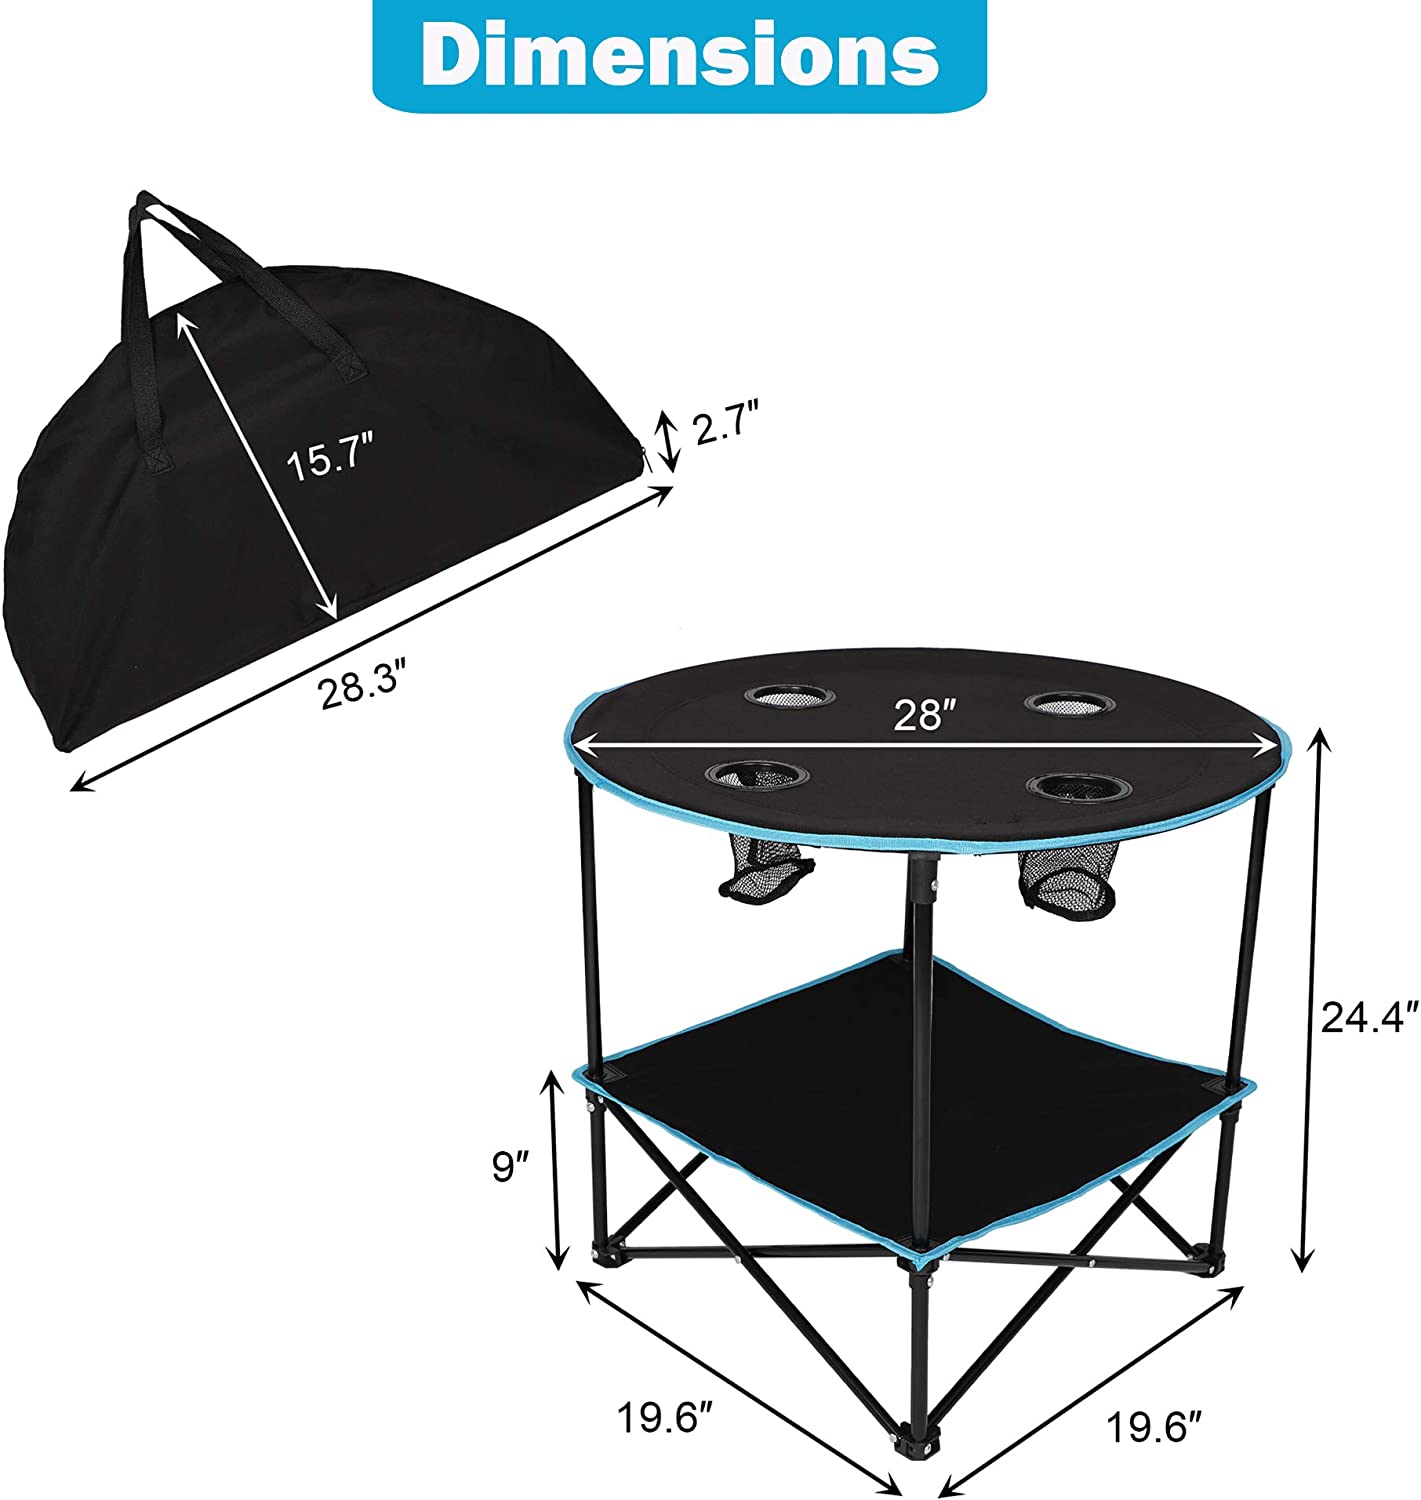 Folding Table, Travel Camping Picnic Collapsible Round Table with 4 Cup Holders and Carry Bag (Black & Blue)